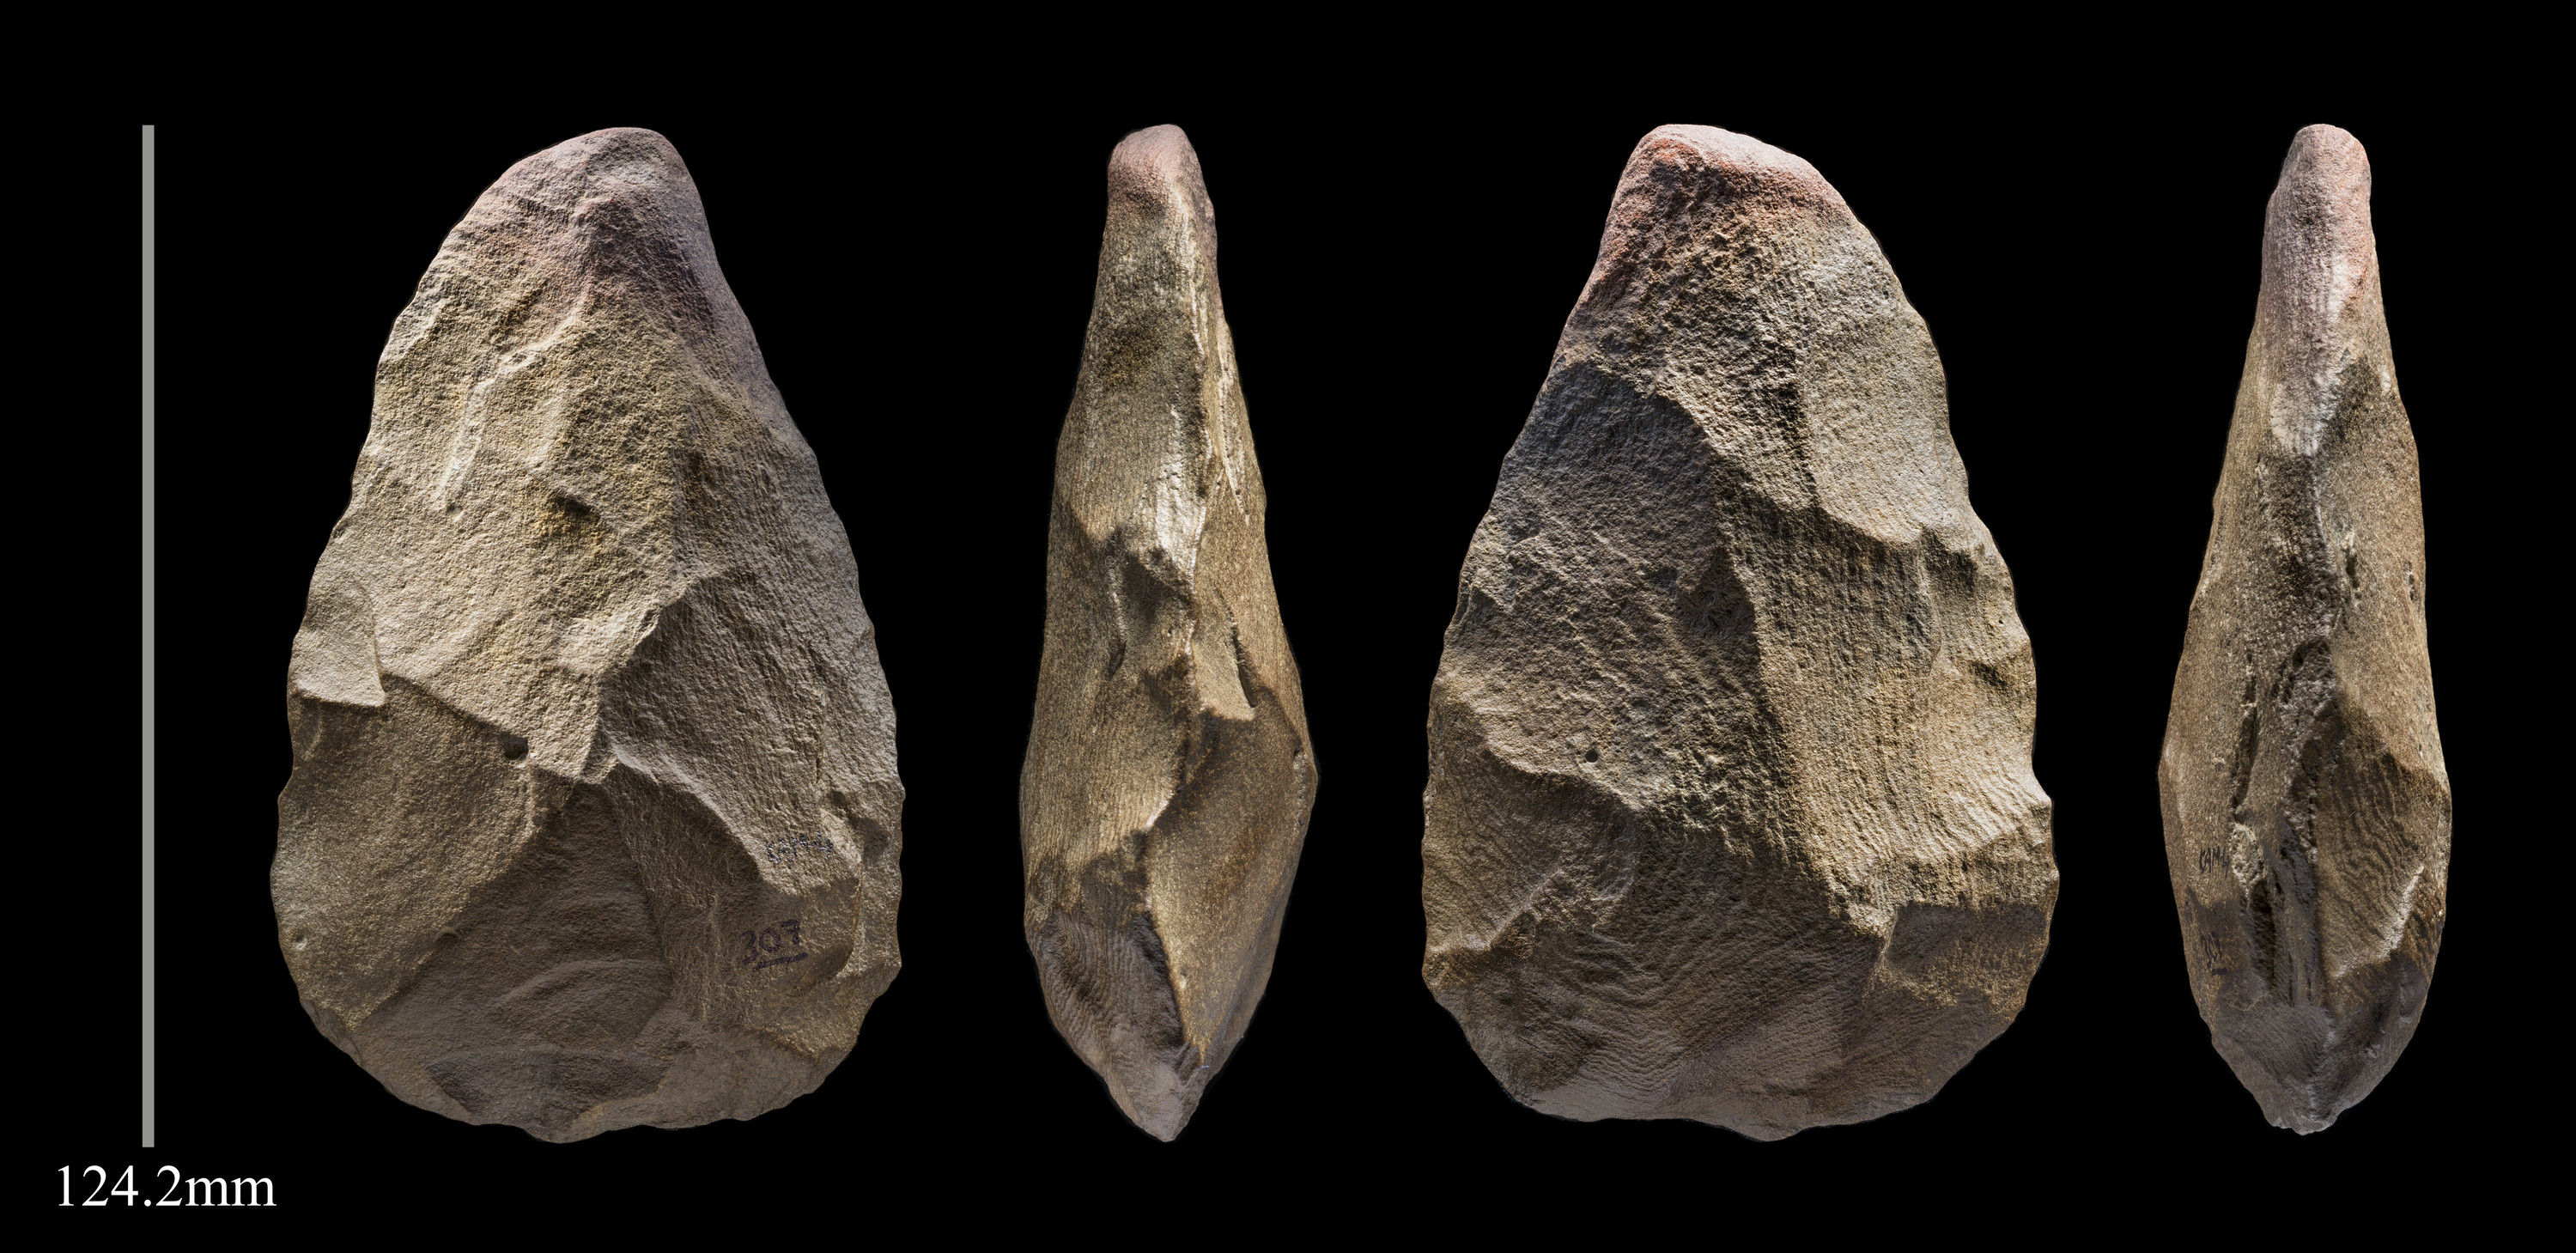 Four different perspectives of a 400,000 year old stone axe